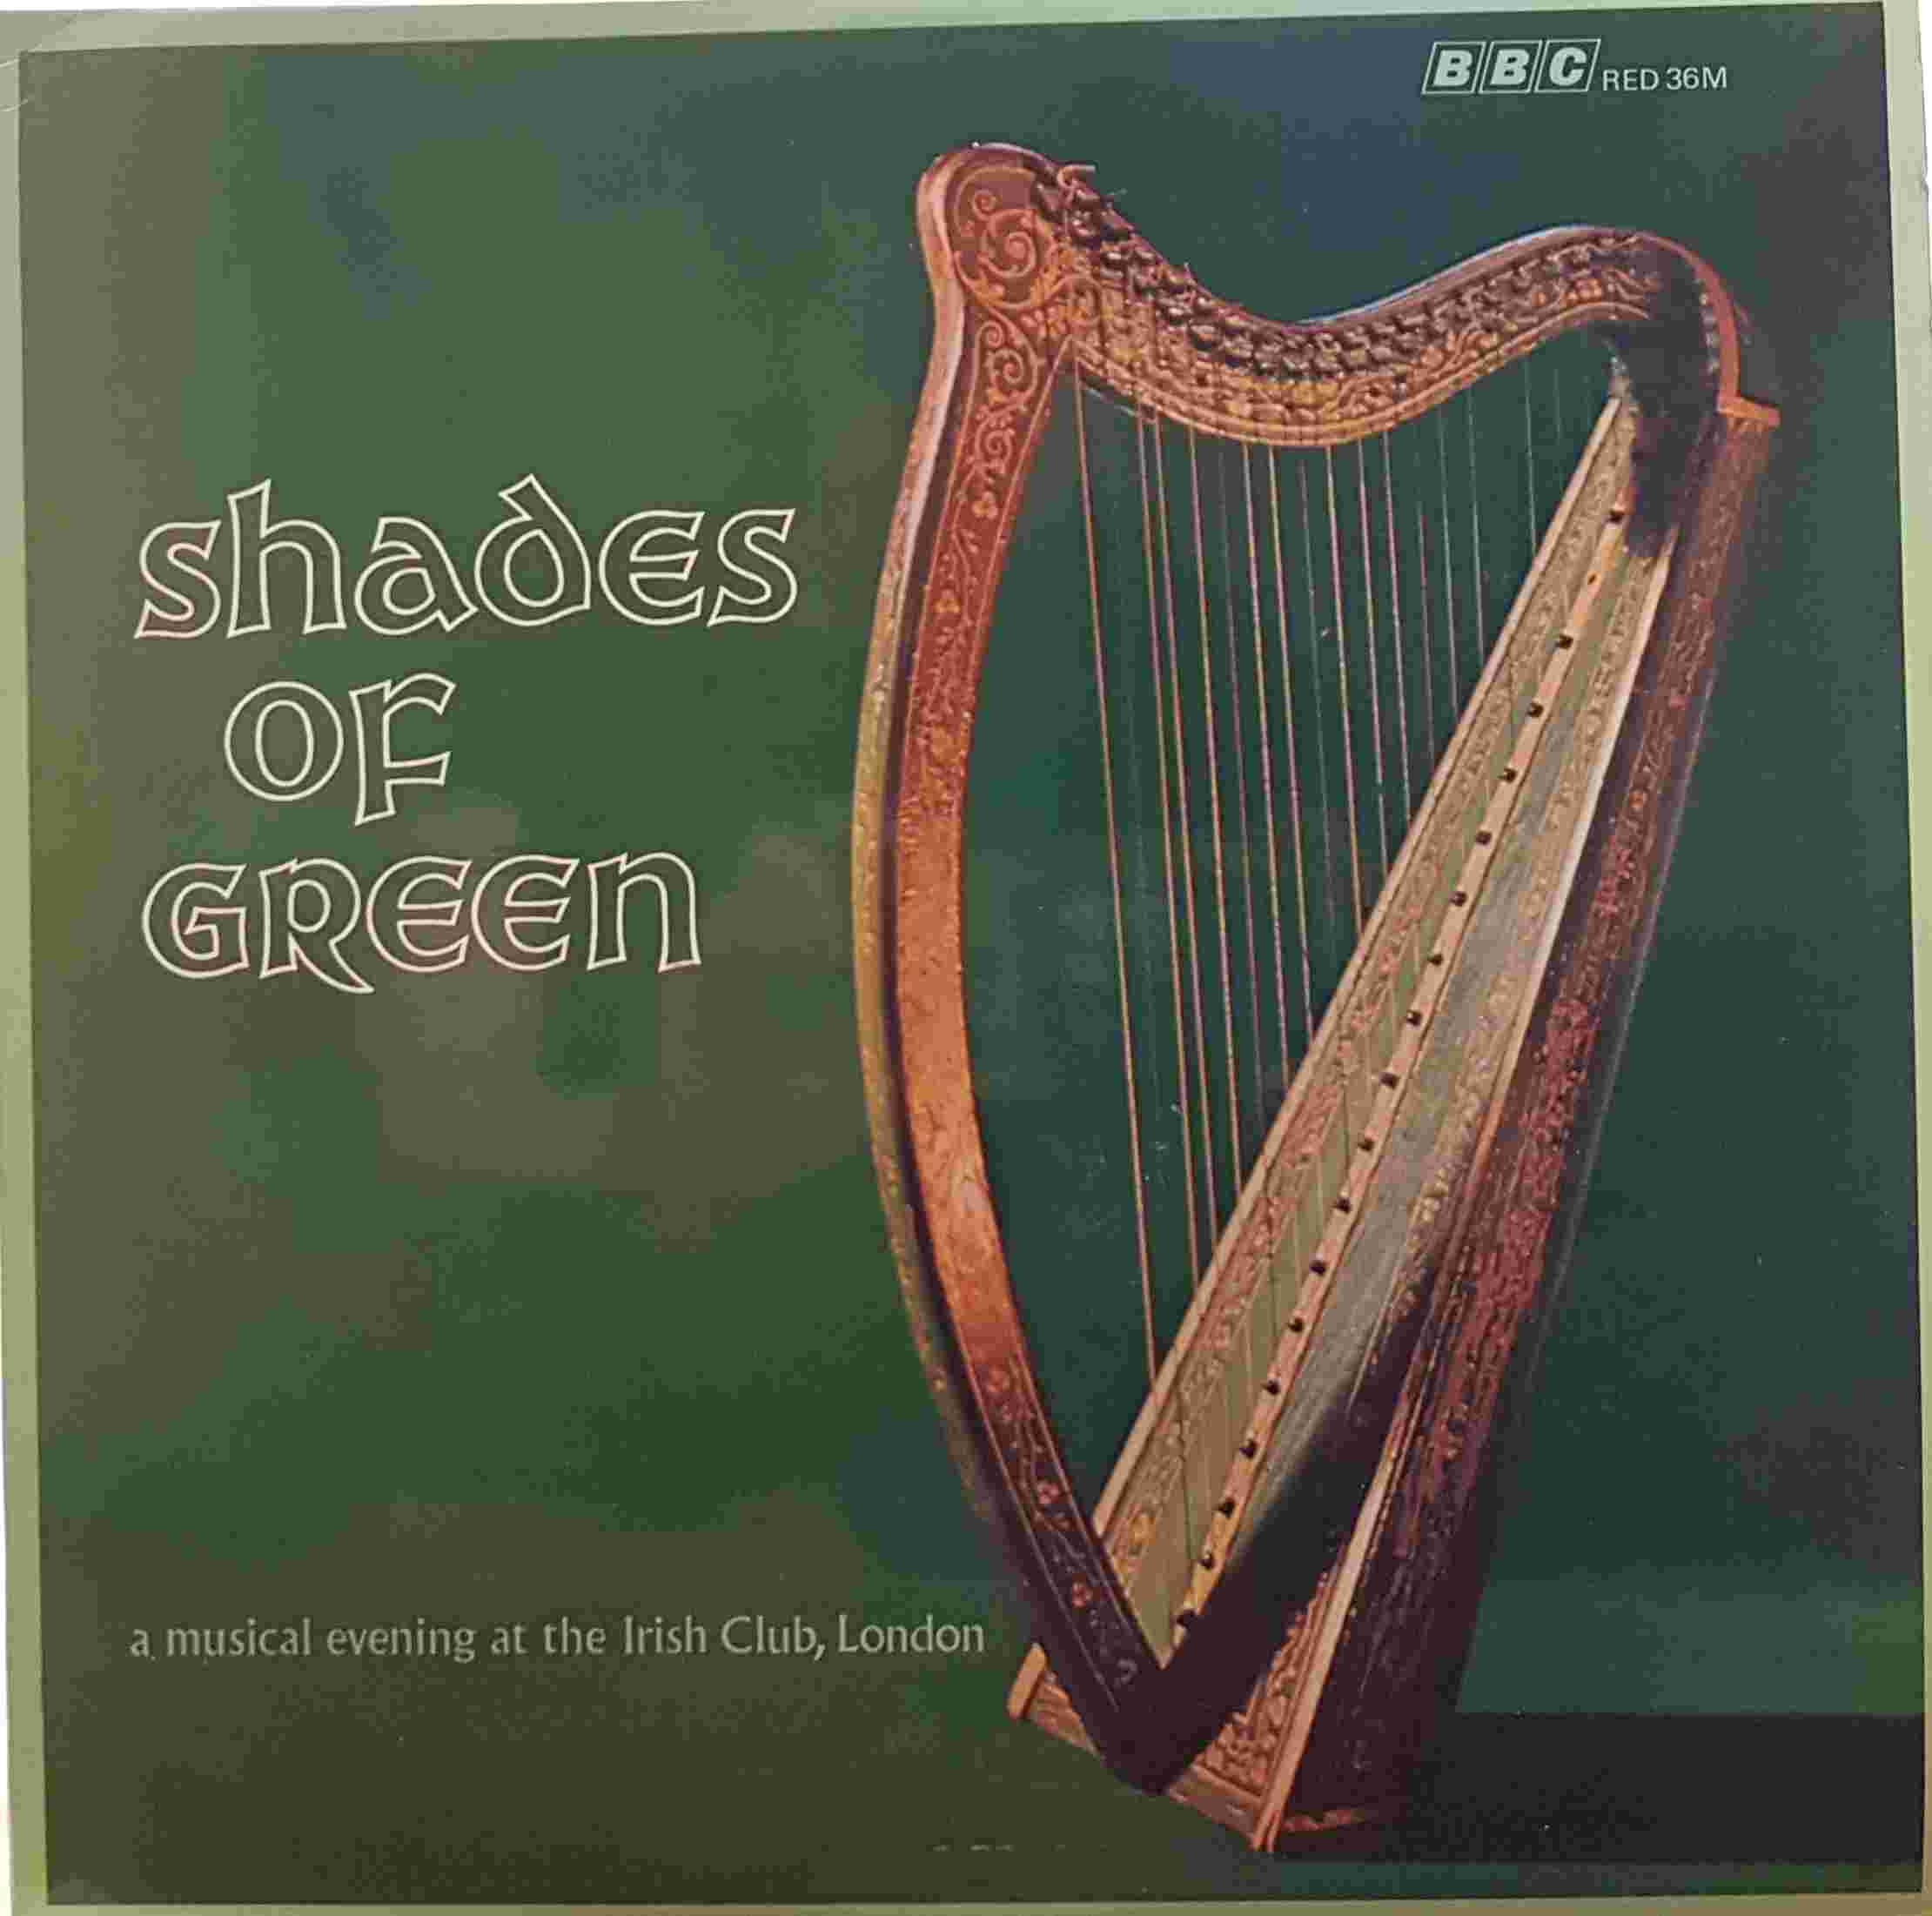 Picture of RED 36 Shades of green by artist Various from the BBC albums - Records and Tapes library